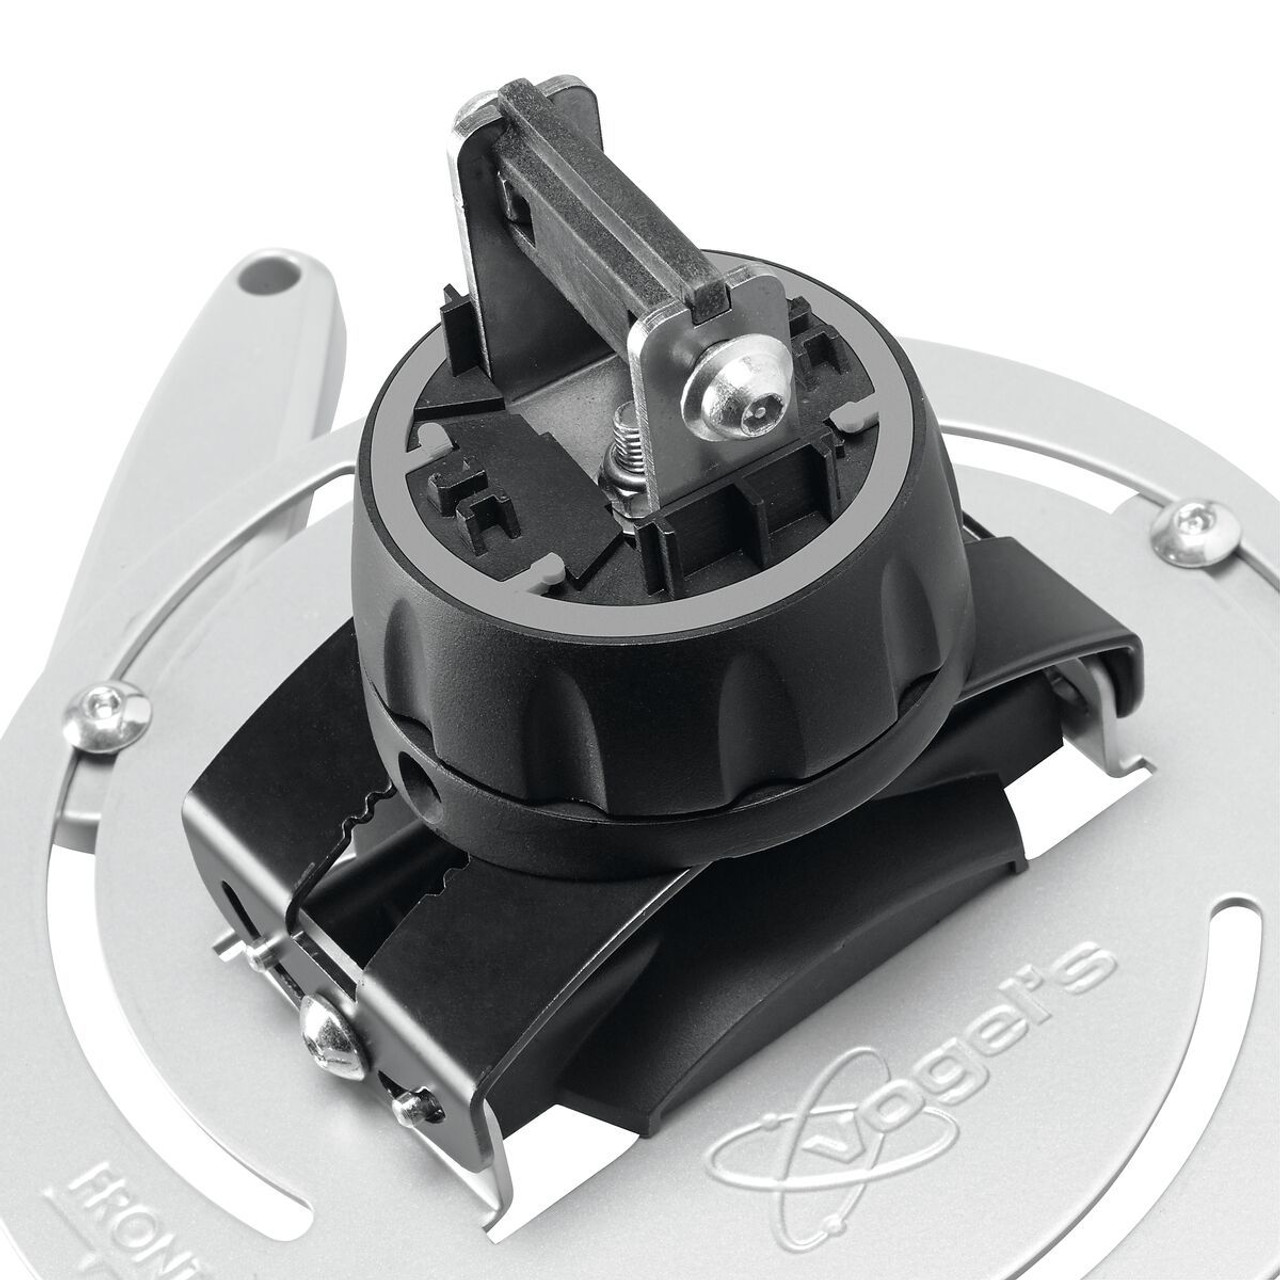 Vogels PPC 2500 Projector Ceiling Mount (30kg Max)